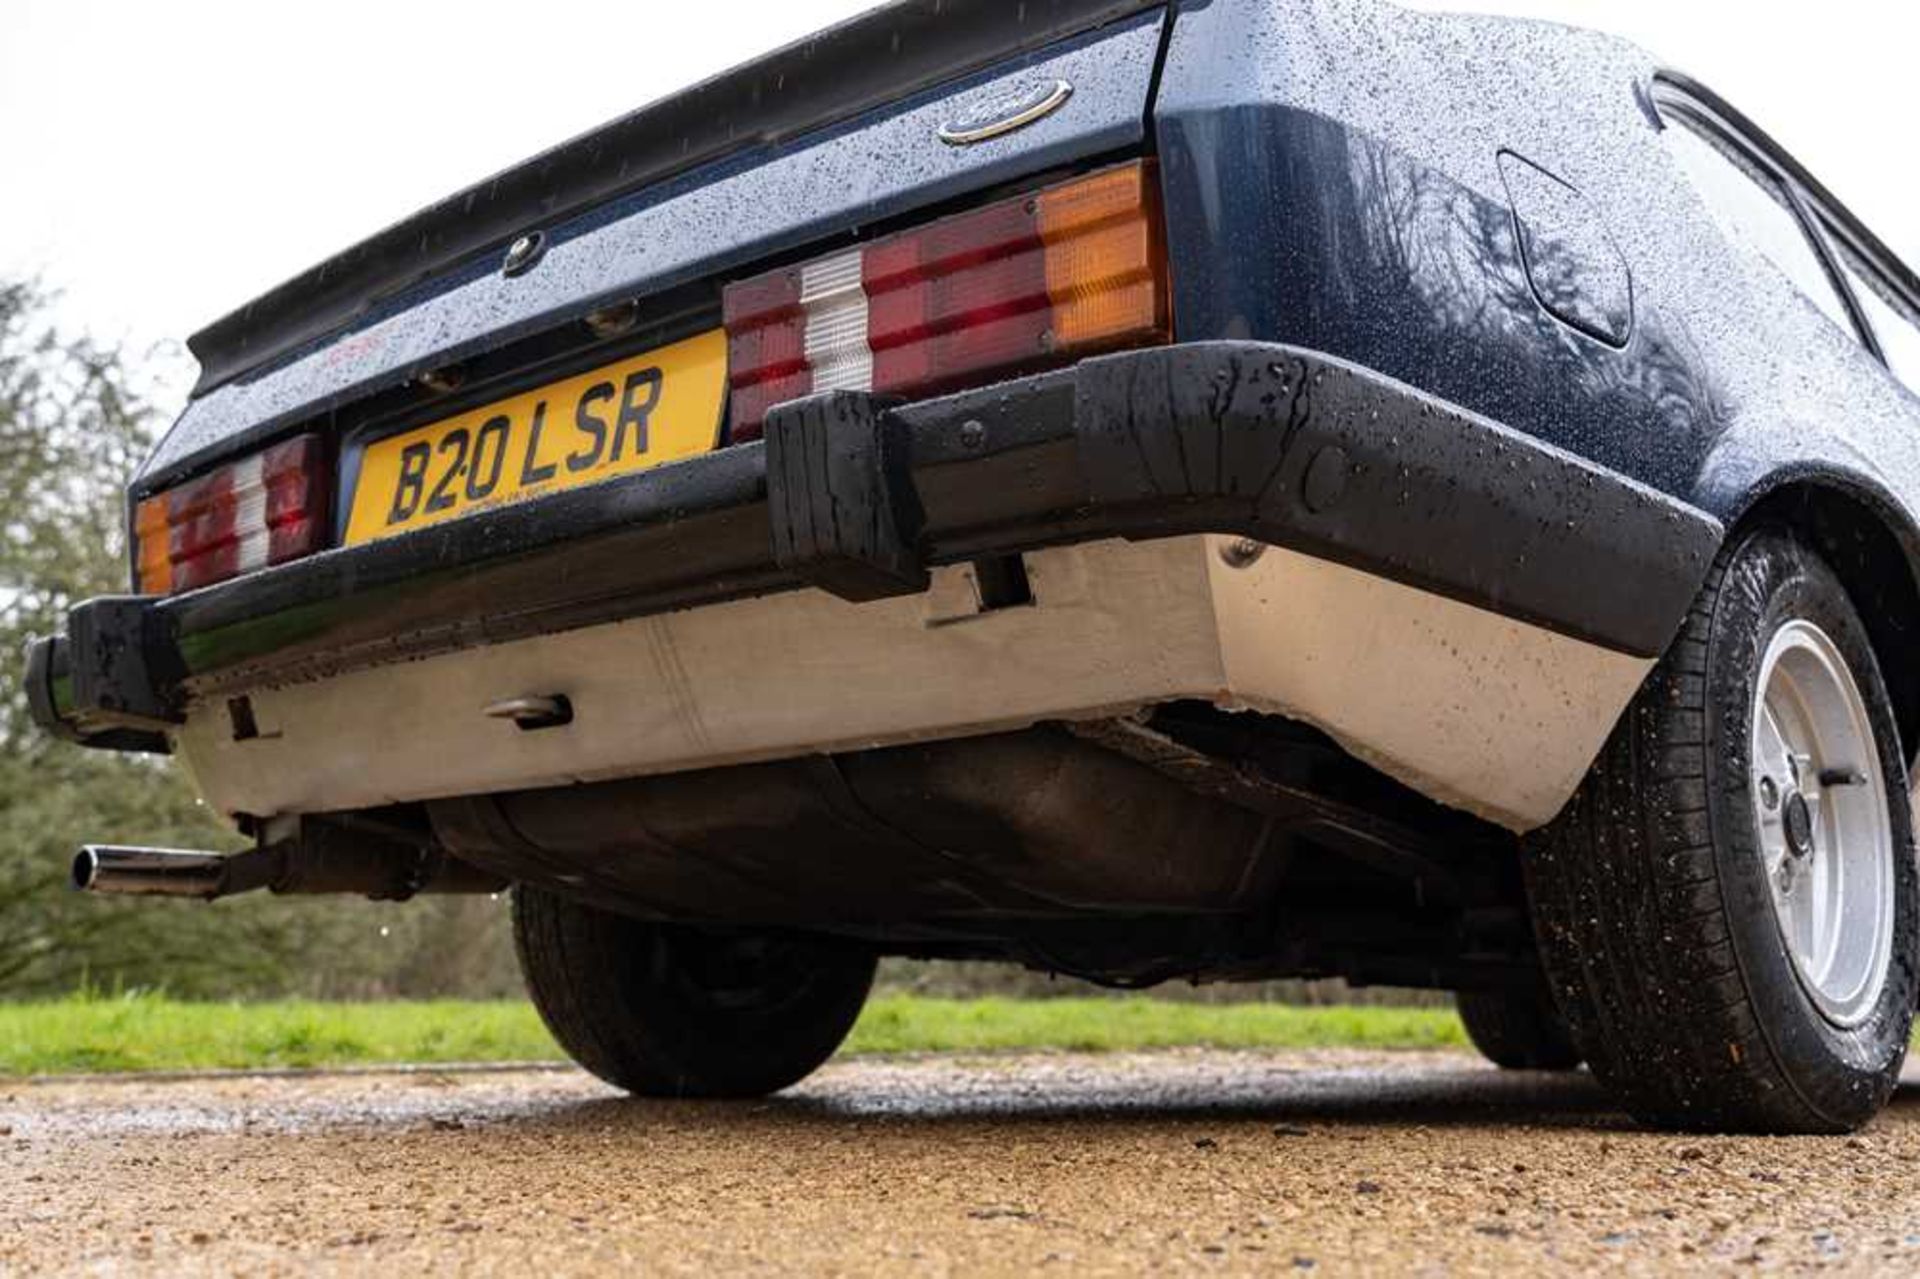 1985 Ford Capri Laser 2.0 Litre Warranted 55,300 miles from new - Image 26 of 67